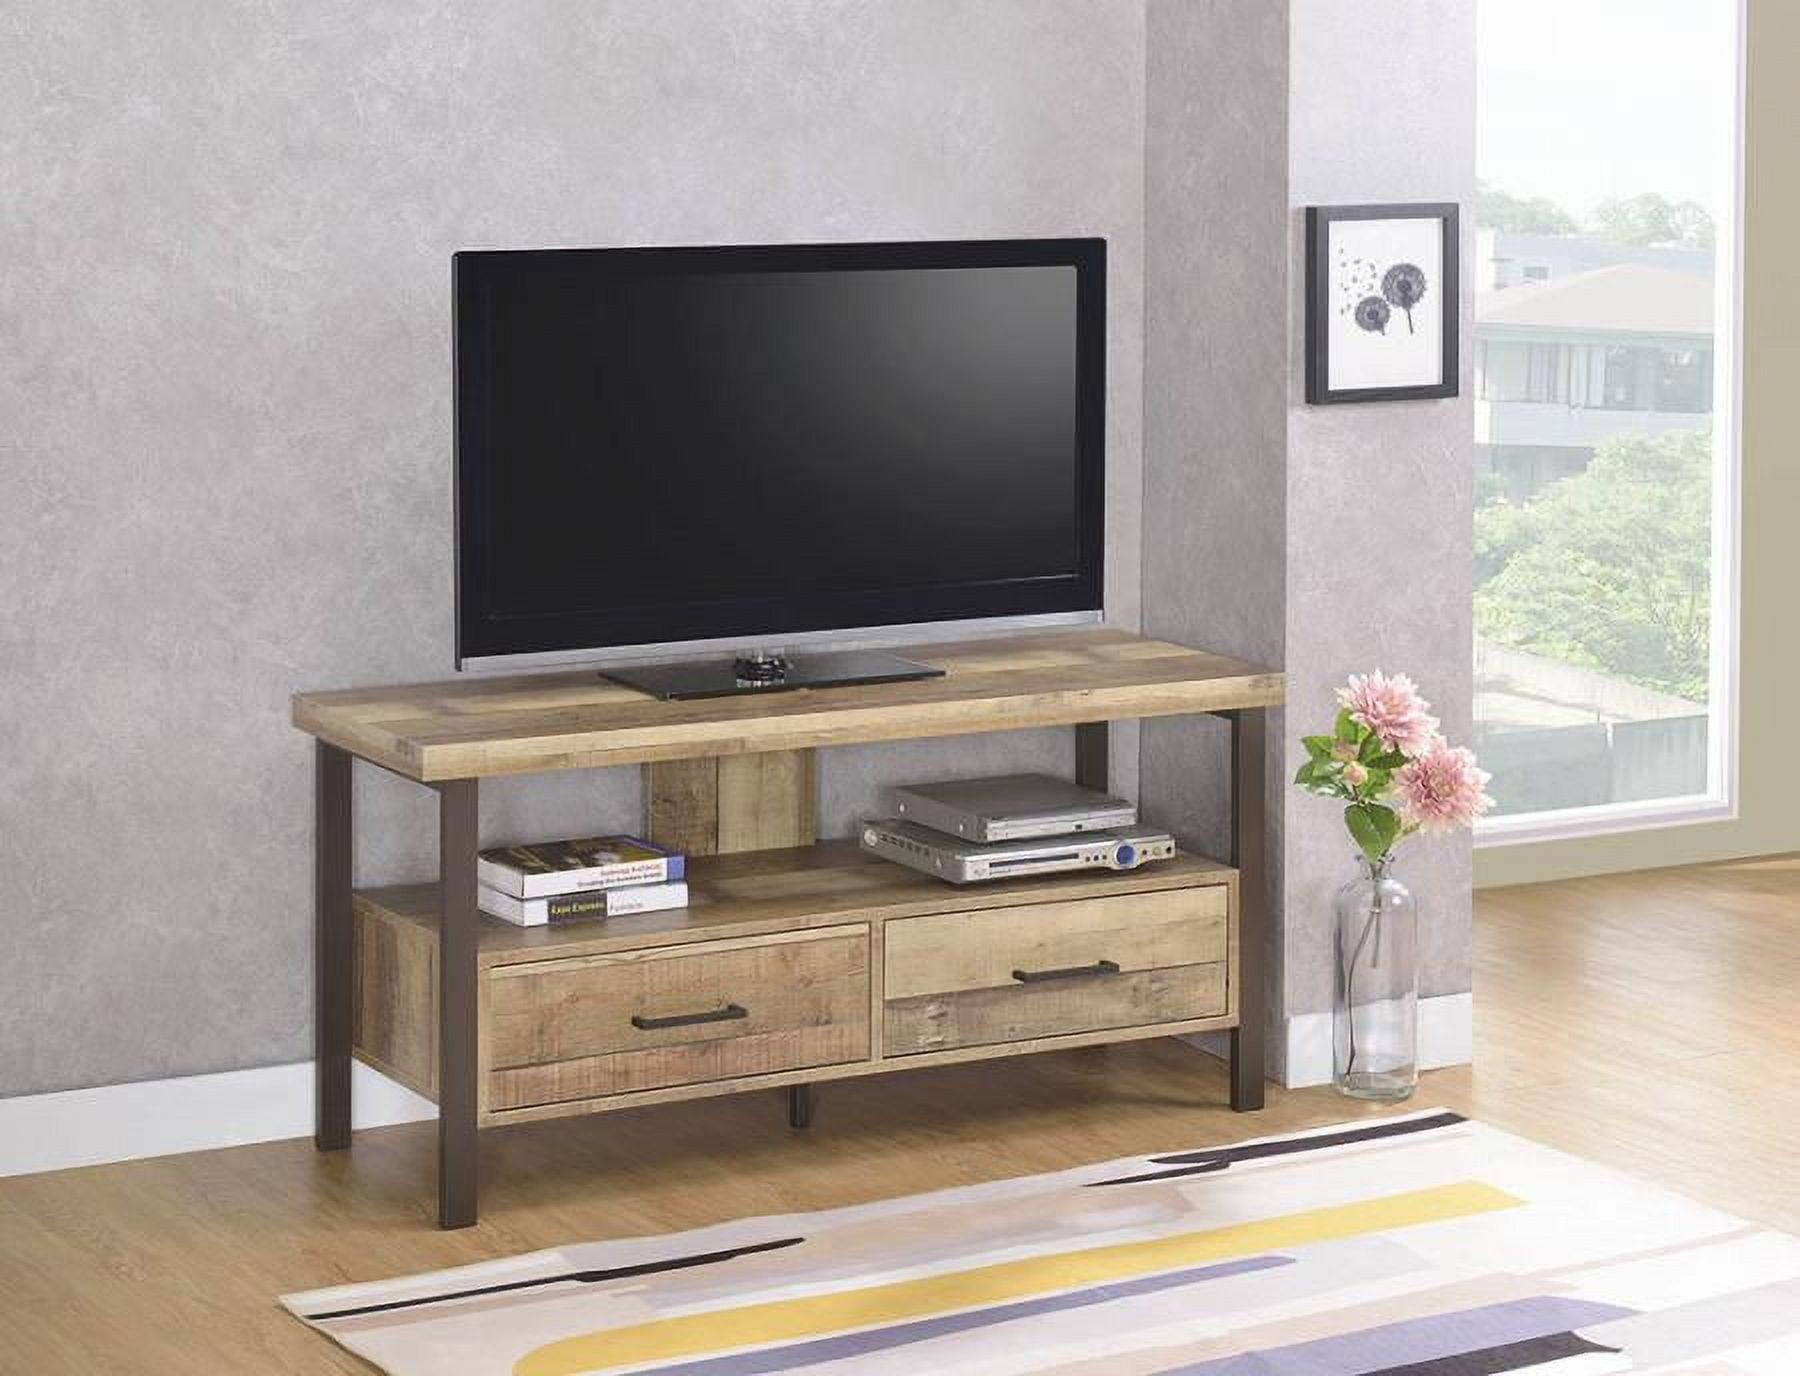 Transitional Weathered Pine TV Console with Black Legs and Storage Drawers